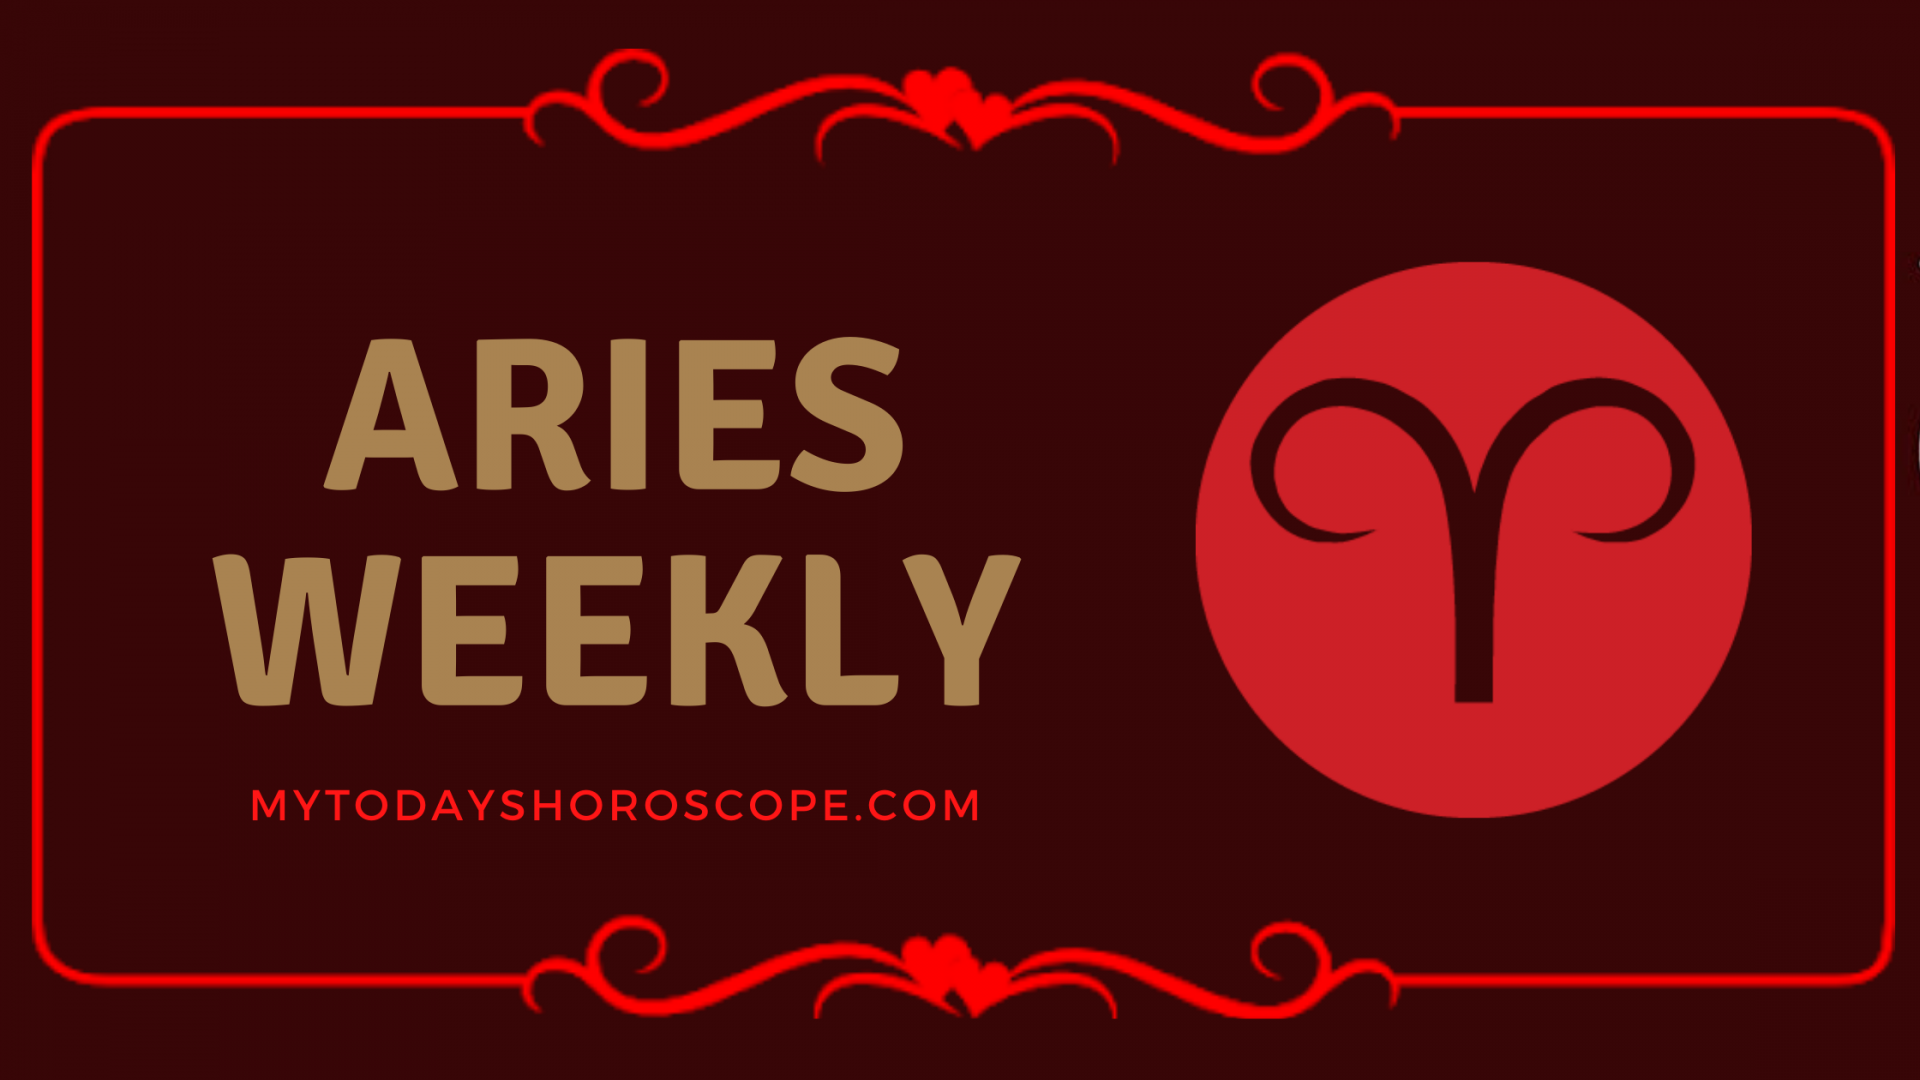 Aries Weekly Horoscope (May 10 - 16): Predictions for Love, Financial, Career and Health